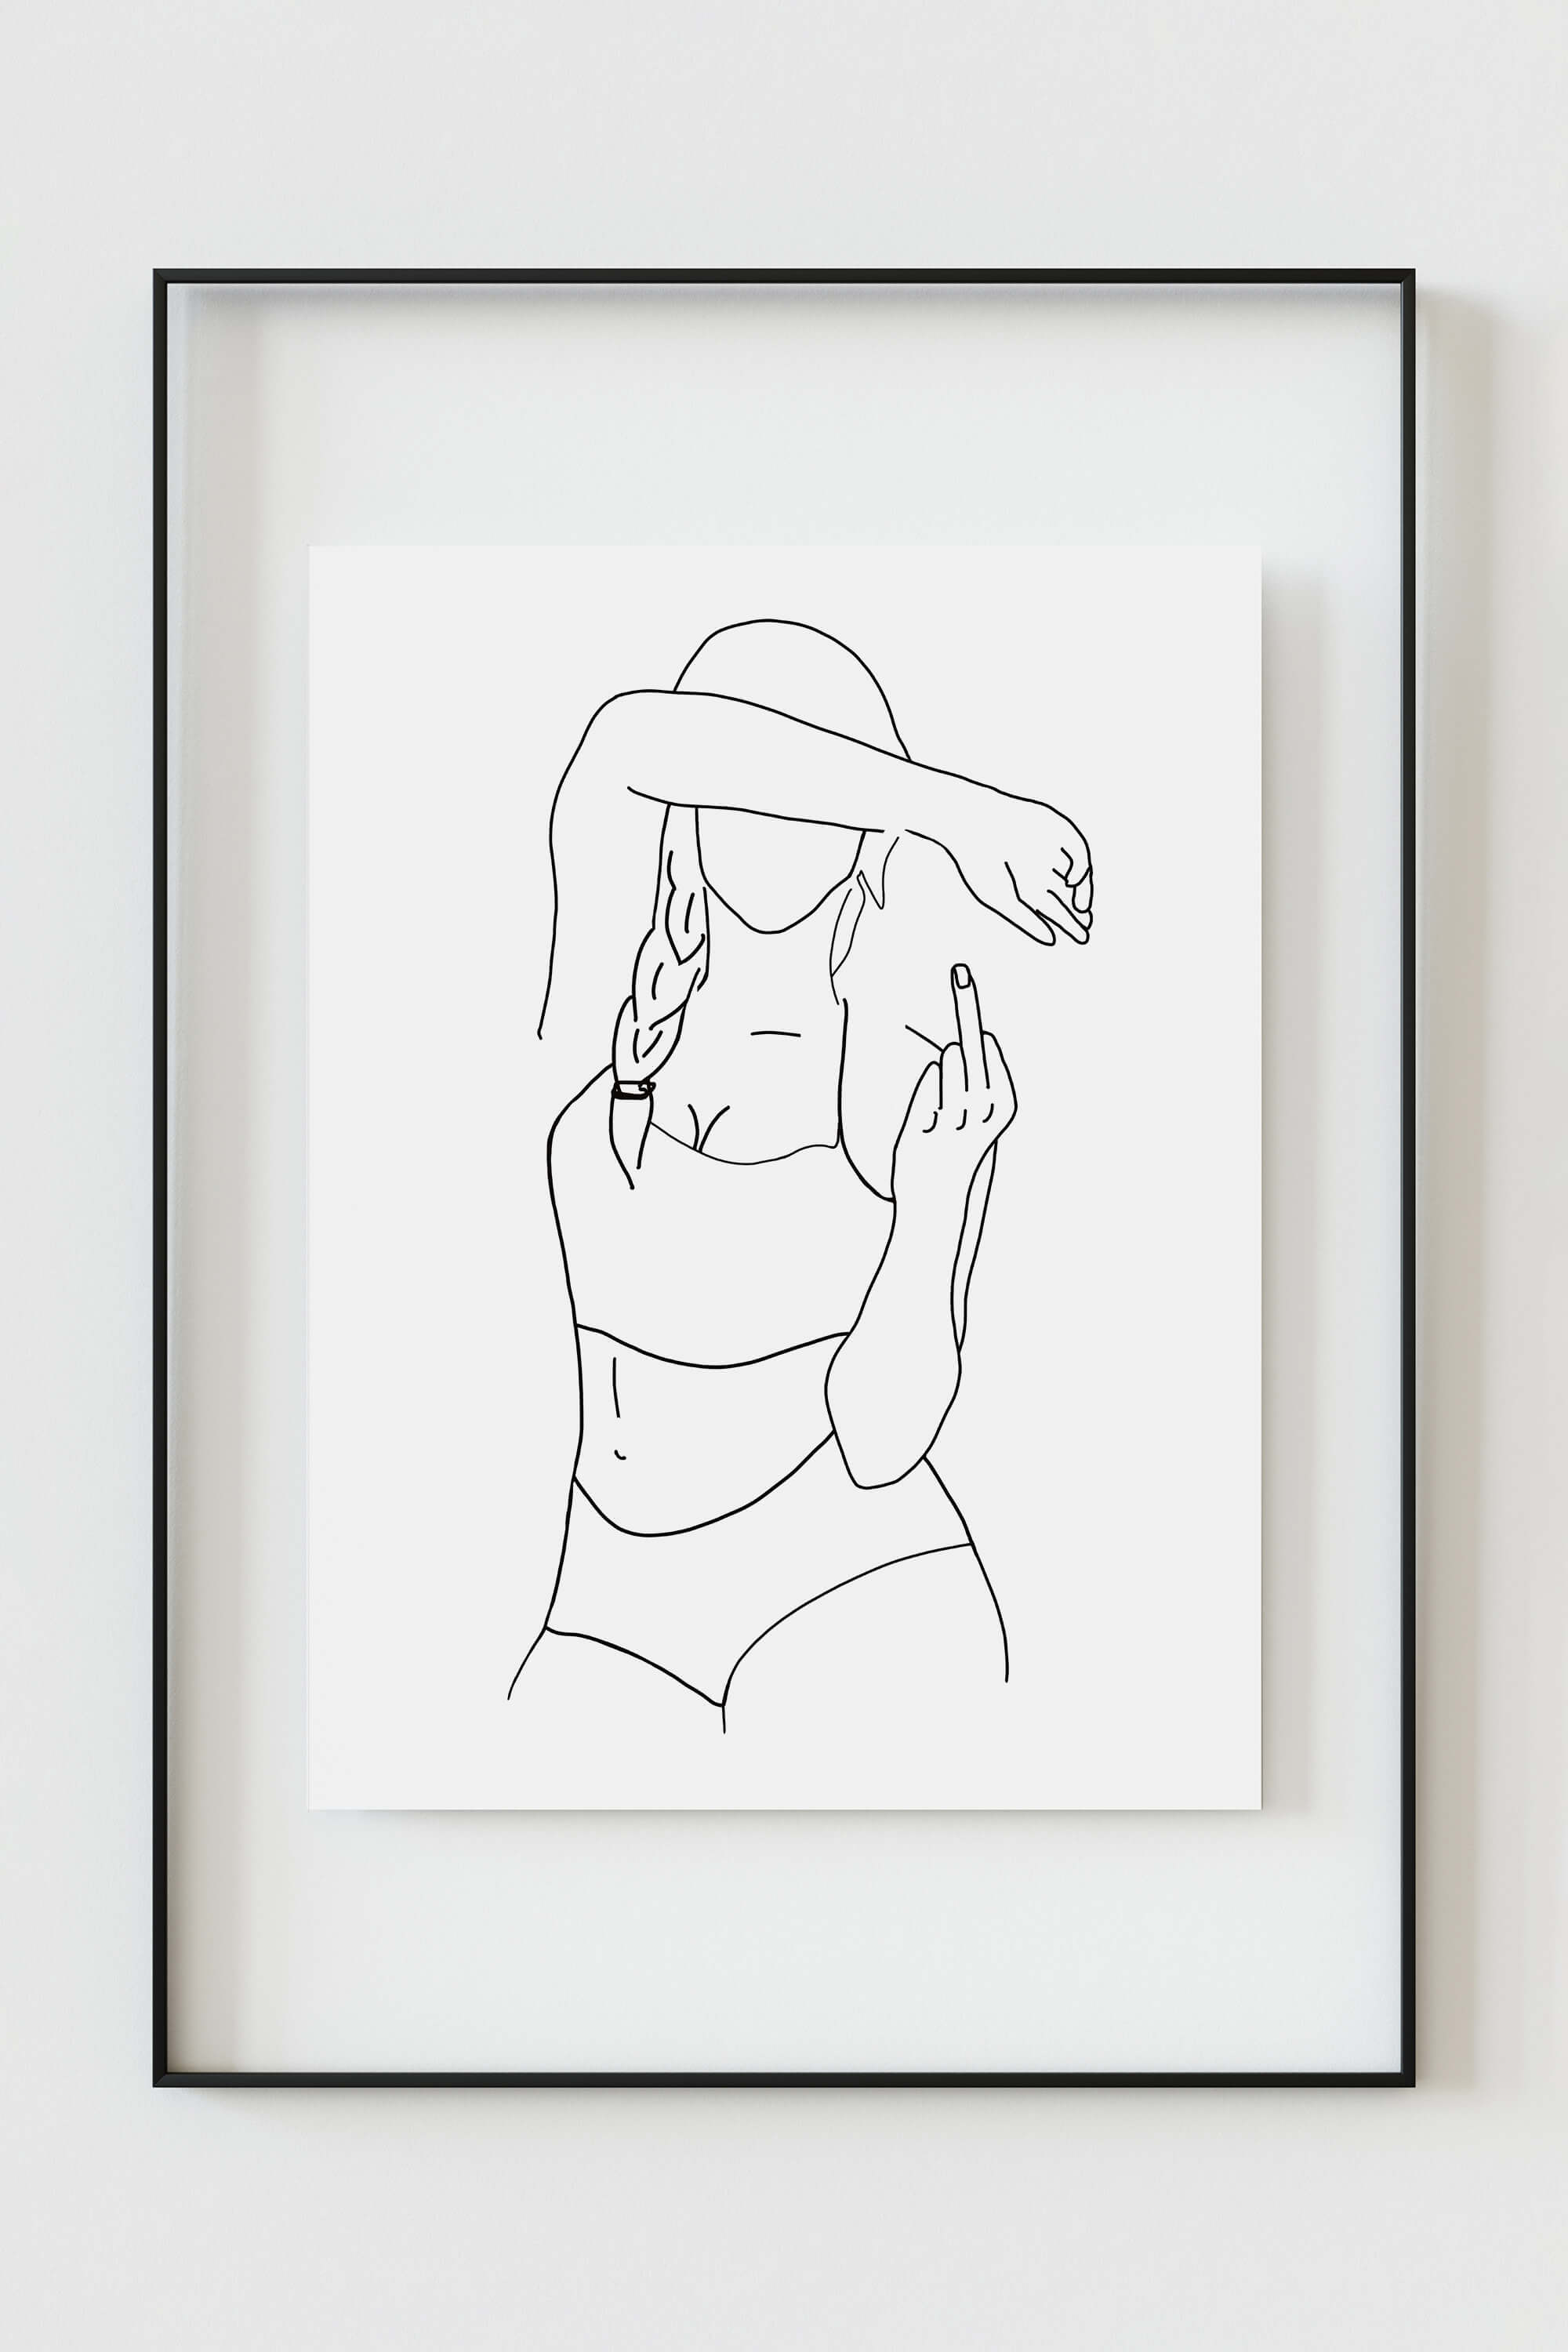 Feminist Wall Elegance: A powerful poster showcasing empowering women with intricate line art in monochrome tones.